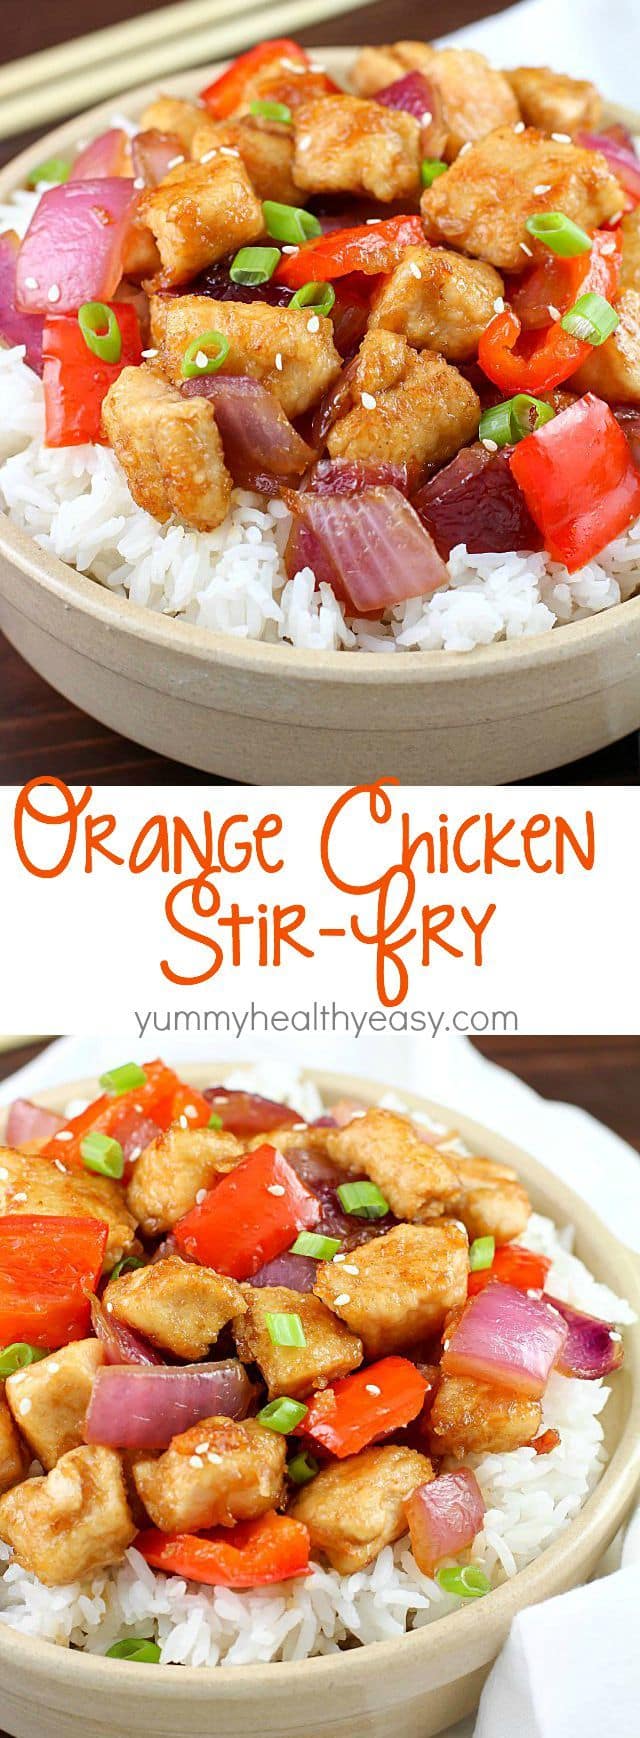 The most incredible Orange Chicken Stir Fry with pan seared, bite-sized chicken, red bell peppers, onion and a delicious sweet and savory sauce served over rice. #dinner #easydinner #orangechicken via @jennikolaus